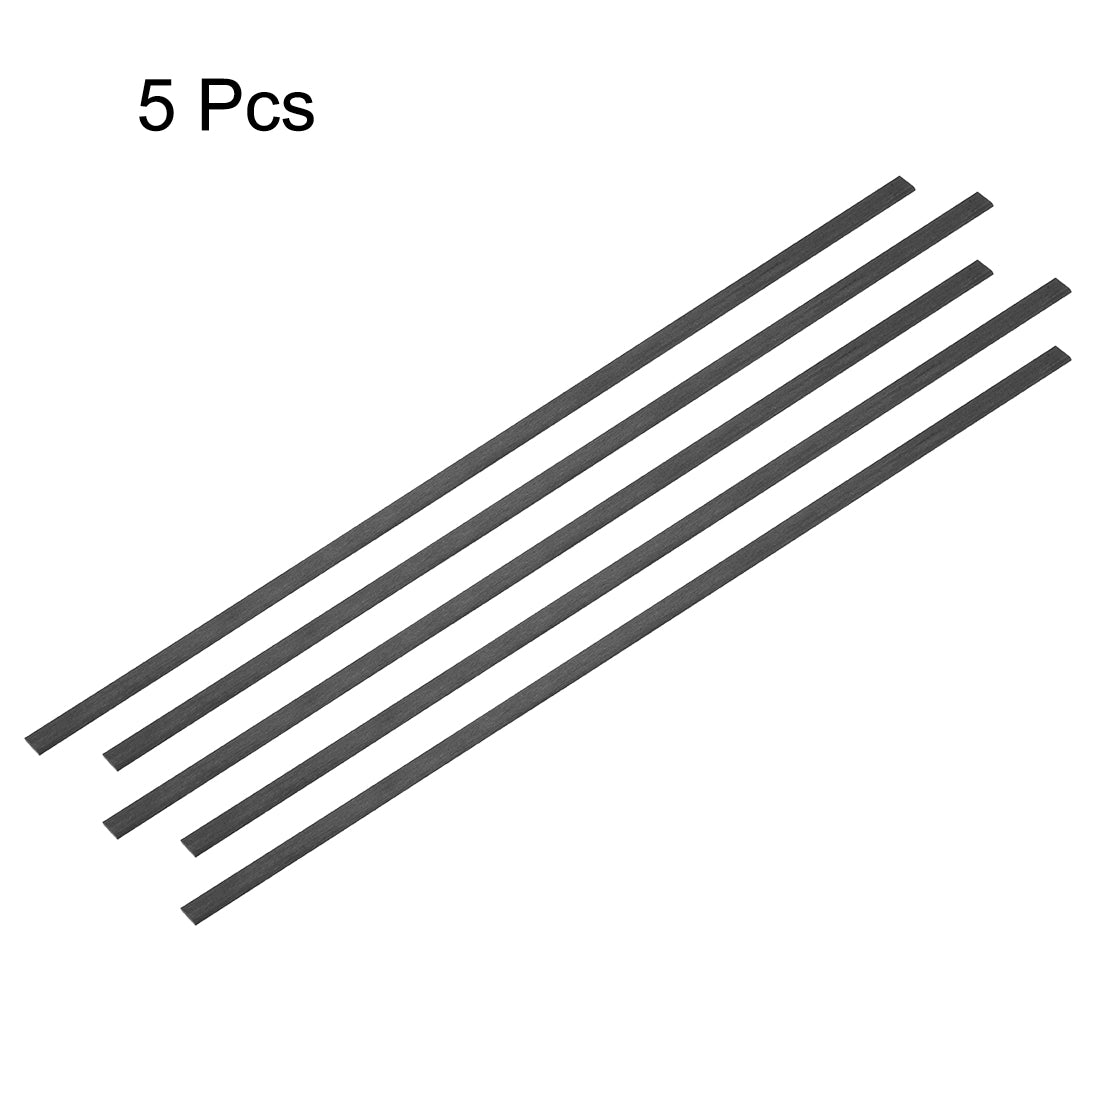 uxcell Uxcell Carbon Fiber Strip Bars 1x5mm 400mm Length Pultruded Carbon Fiber Strips for Kites, RC Airplane 5 Pcs